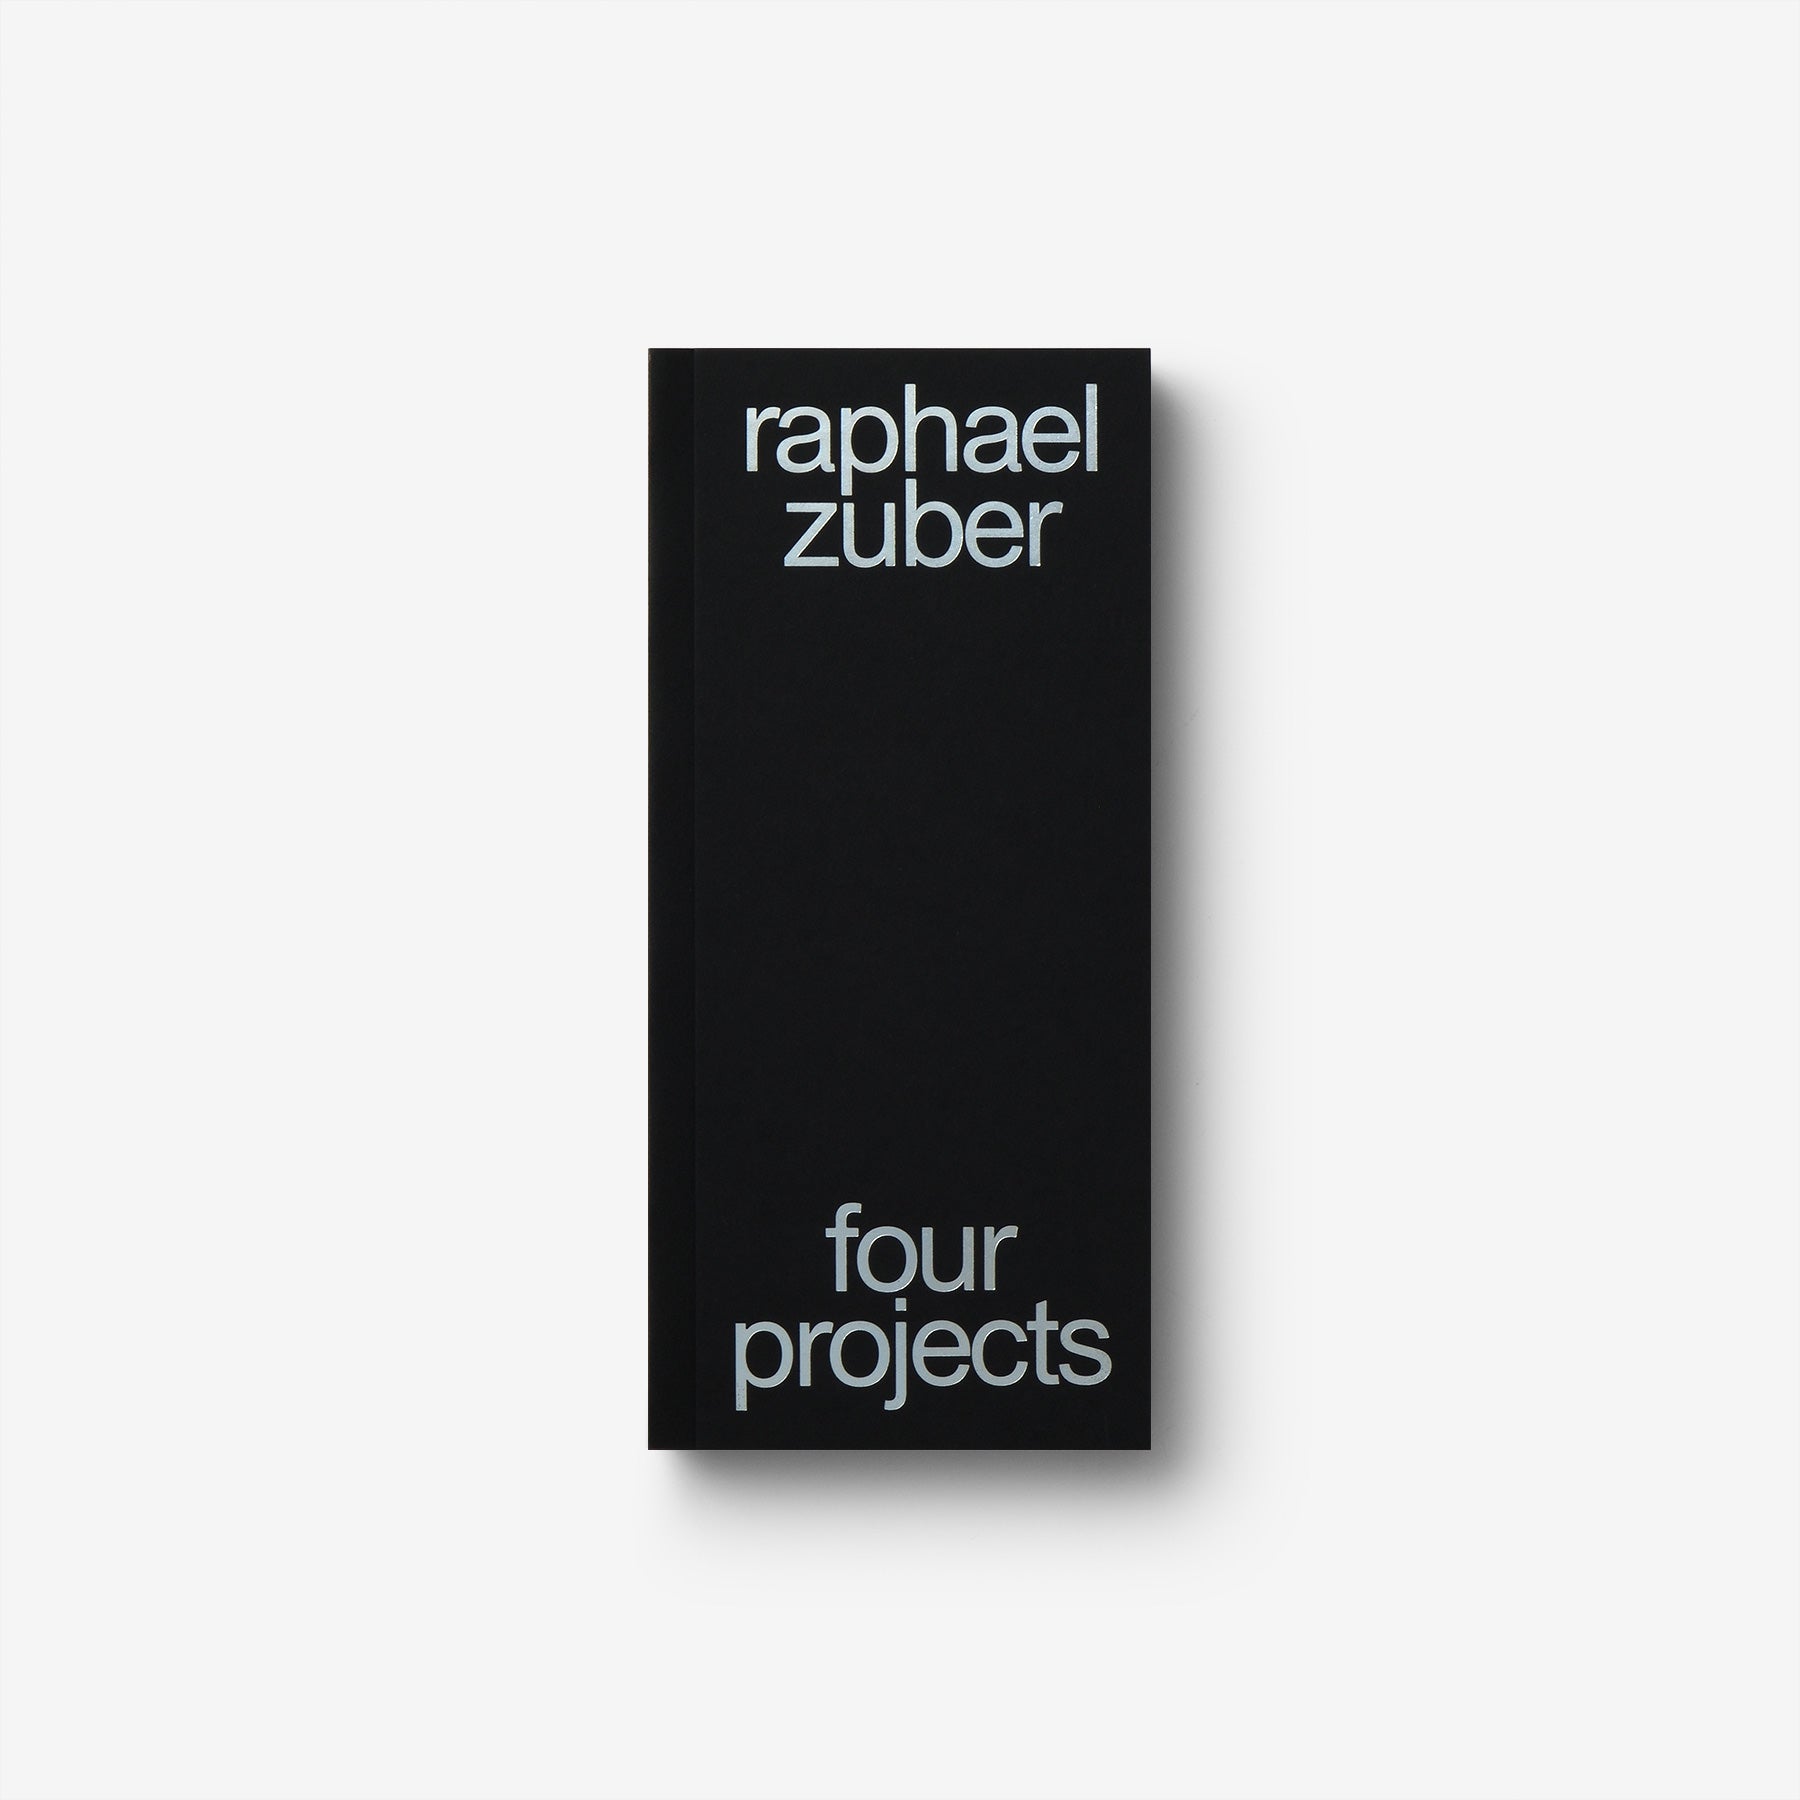 Raphael Zuber: Four Projects